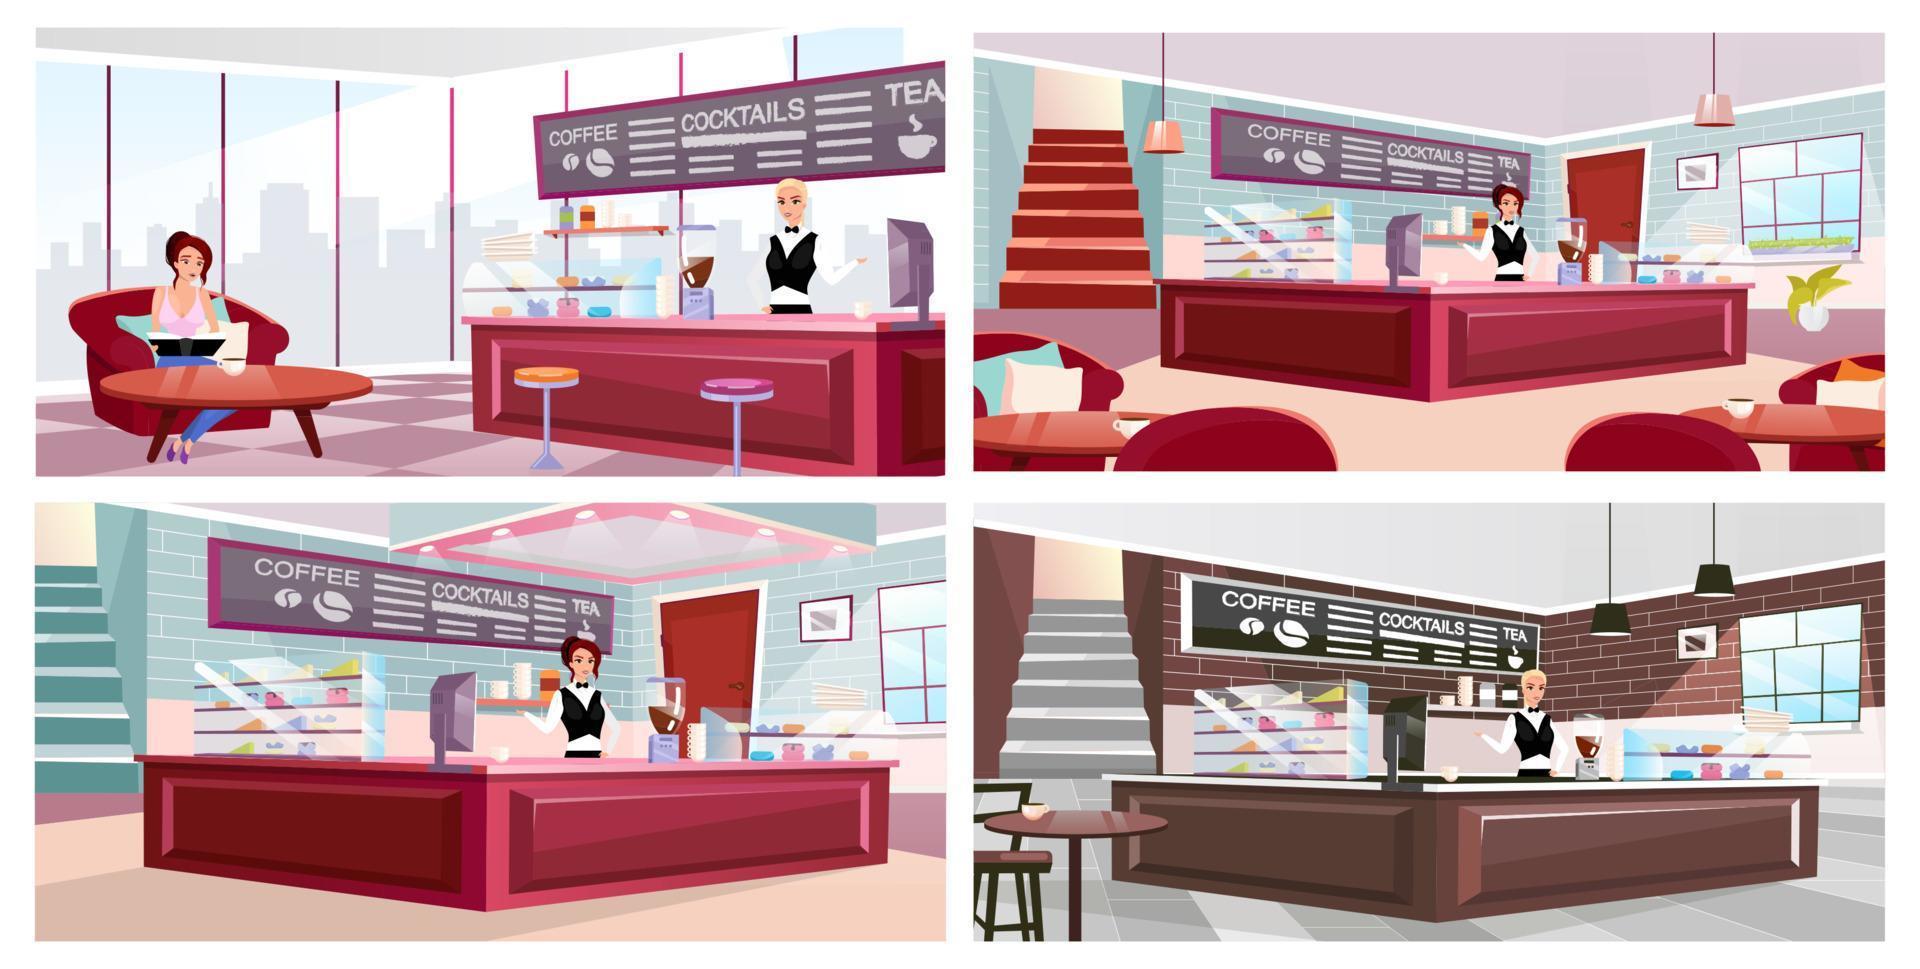 Cafe interior flat vector illustrations set. Coffeehouse visitor and barista at work cartoon characters. Trendy wooden furniture, vintage brick walls with panoramic windows. Professional bar equipment